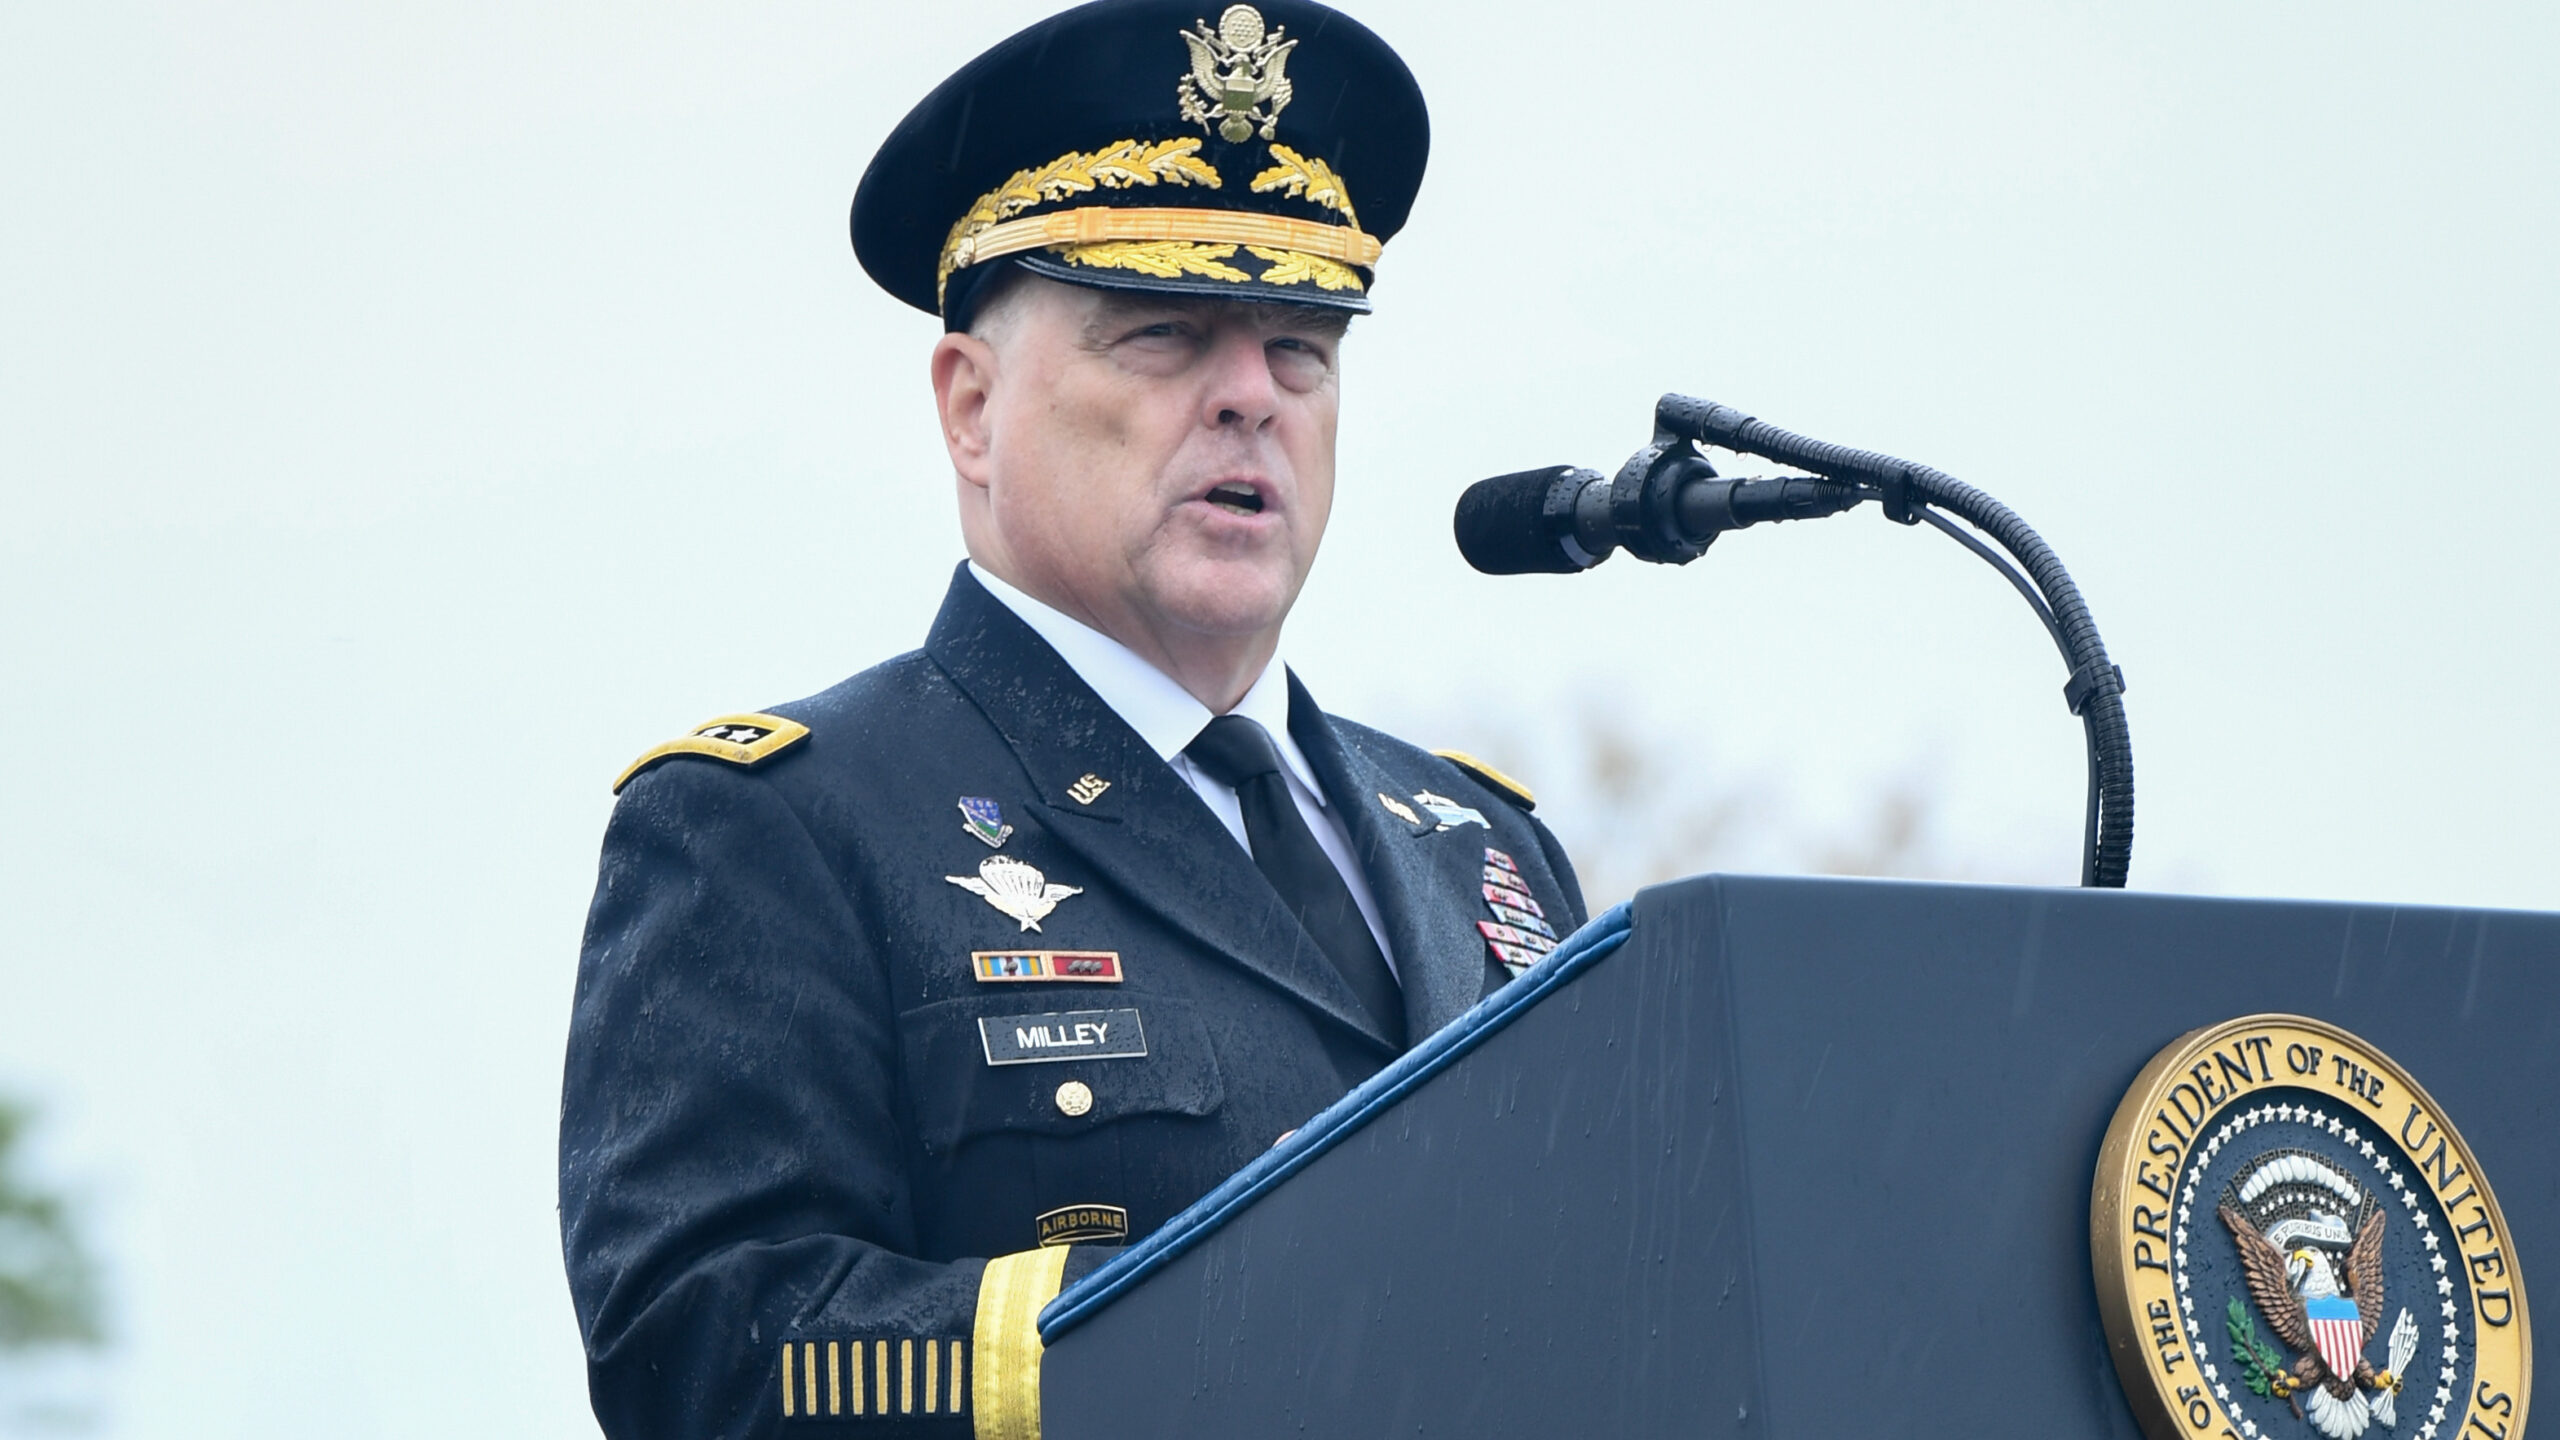 Tucker Carlson claims Gen. Milley is not qualified to be chairman of the Joint Chiefs of Staff. He’s wrong.